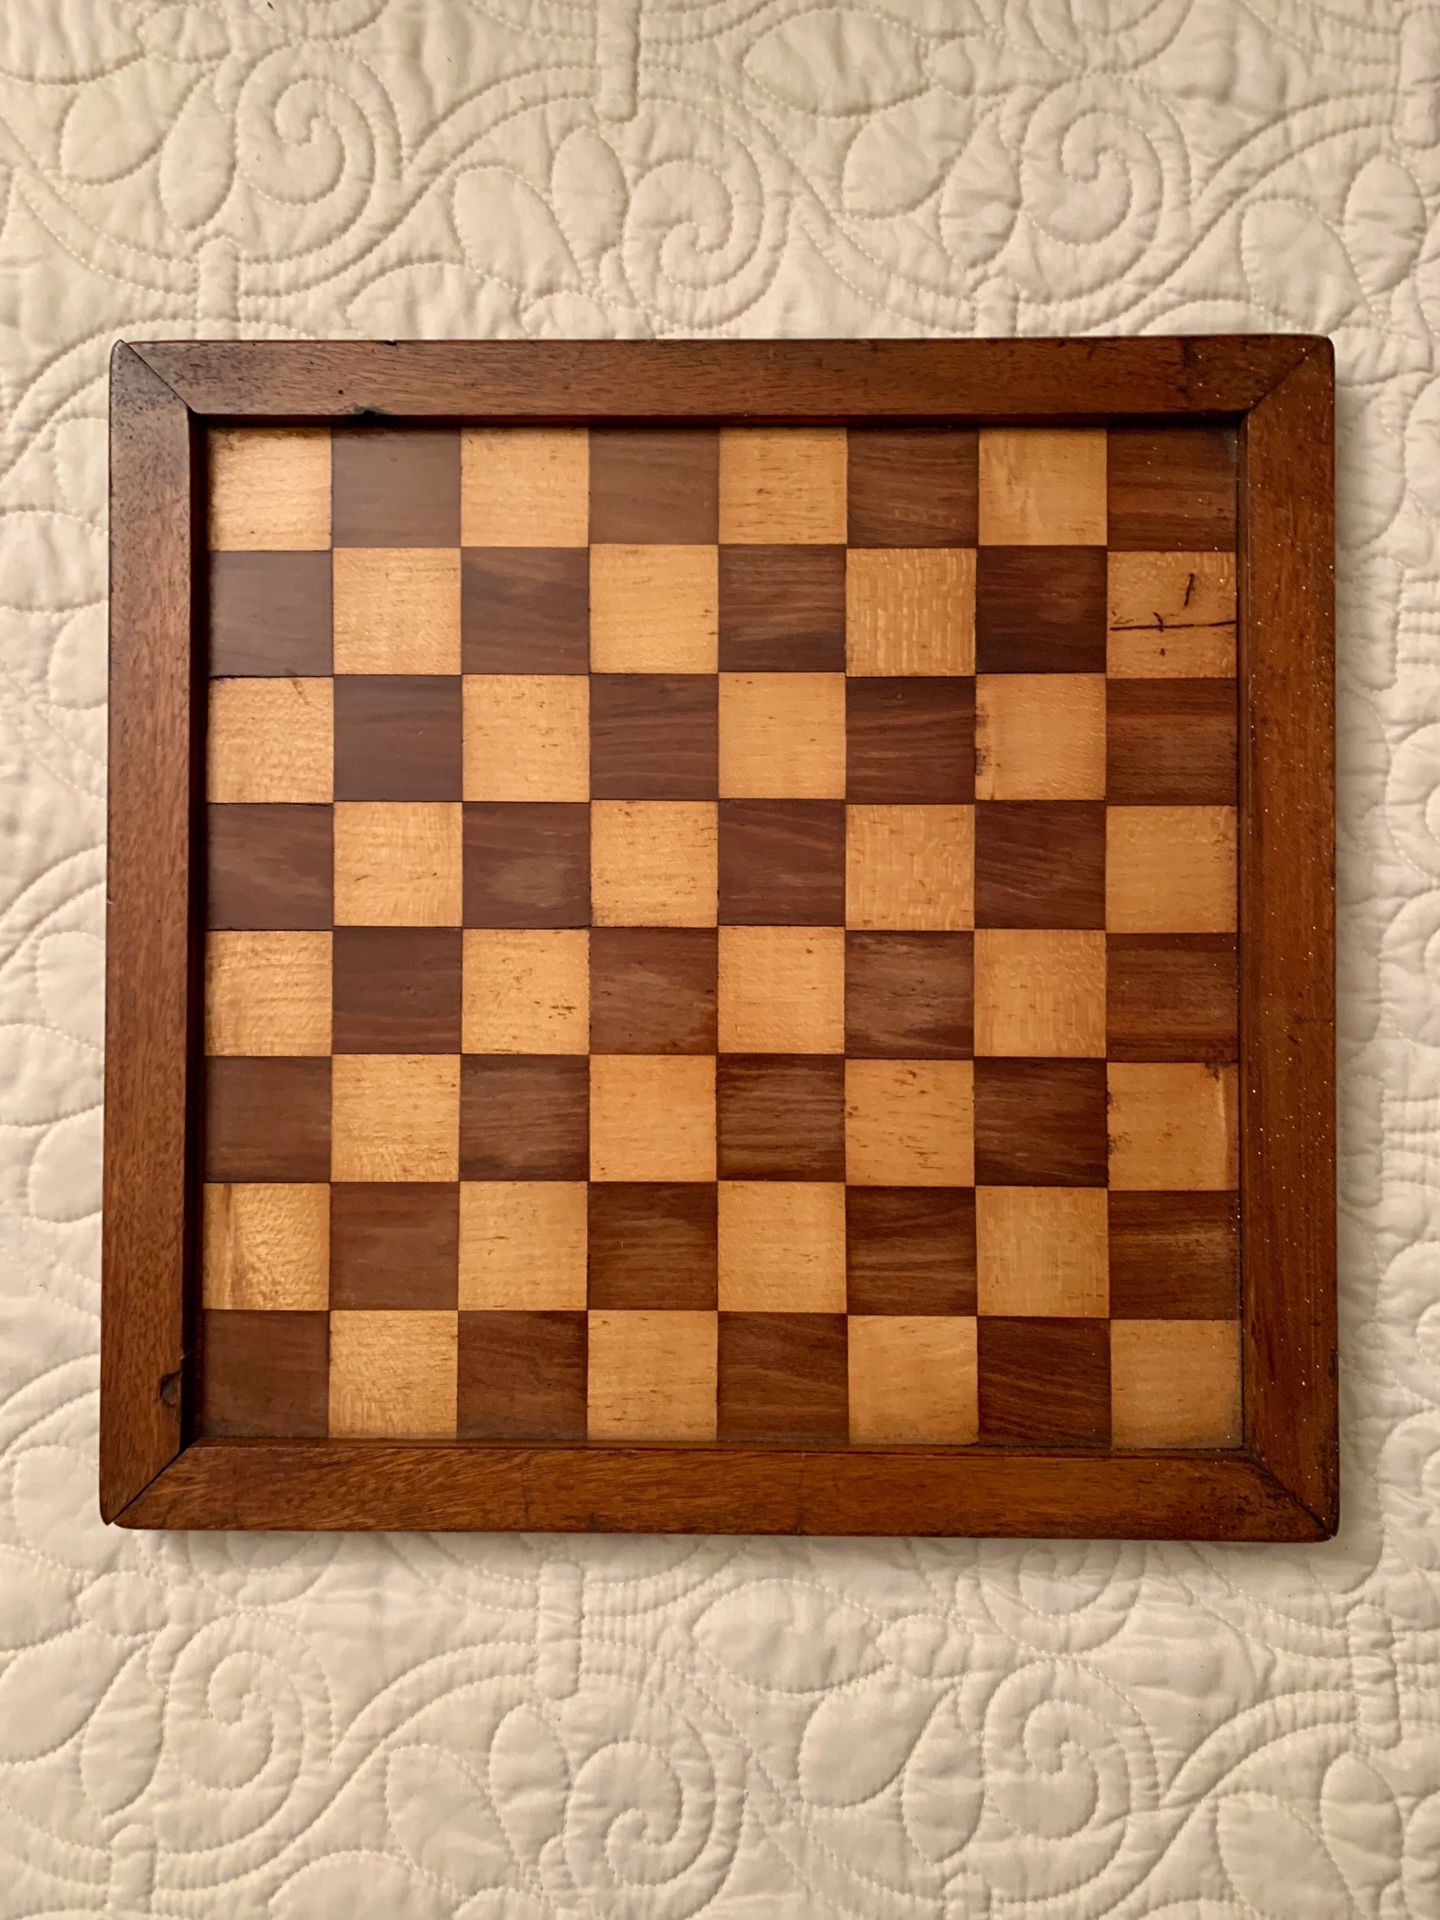 Beautiful vintage checkerboard/game board. It is 11 1/2“ x 11 1/4“.